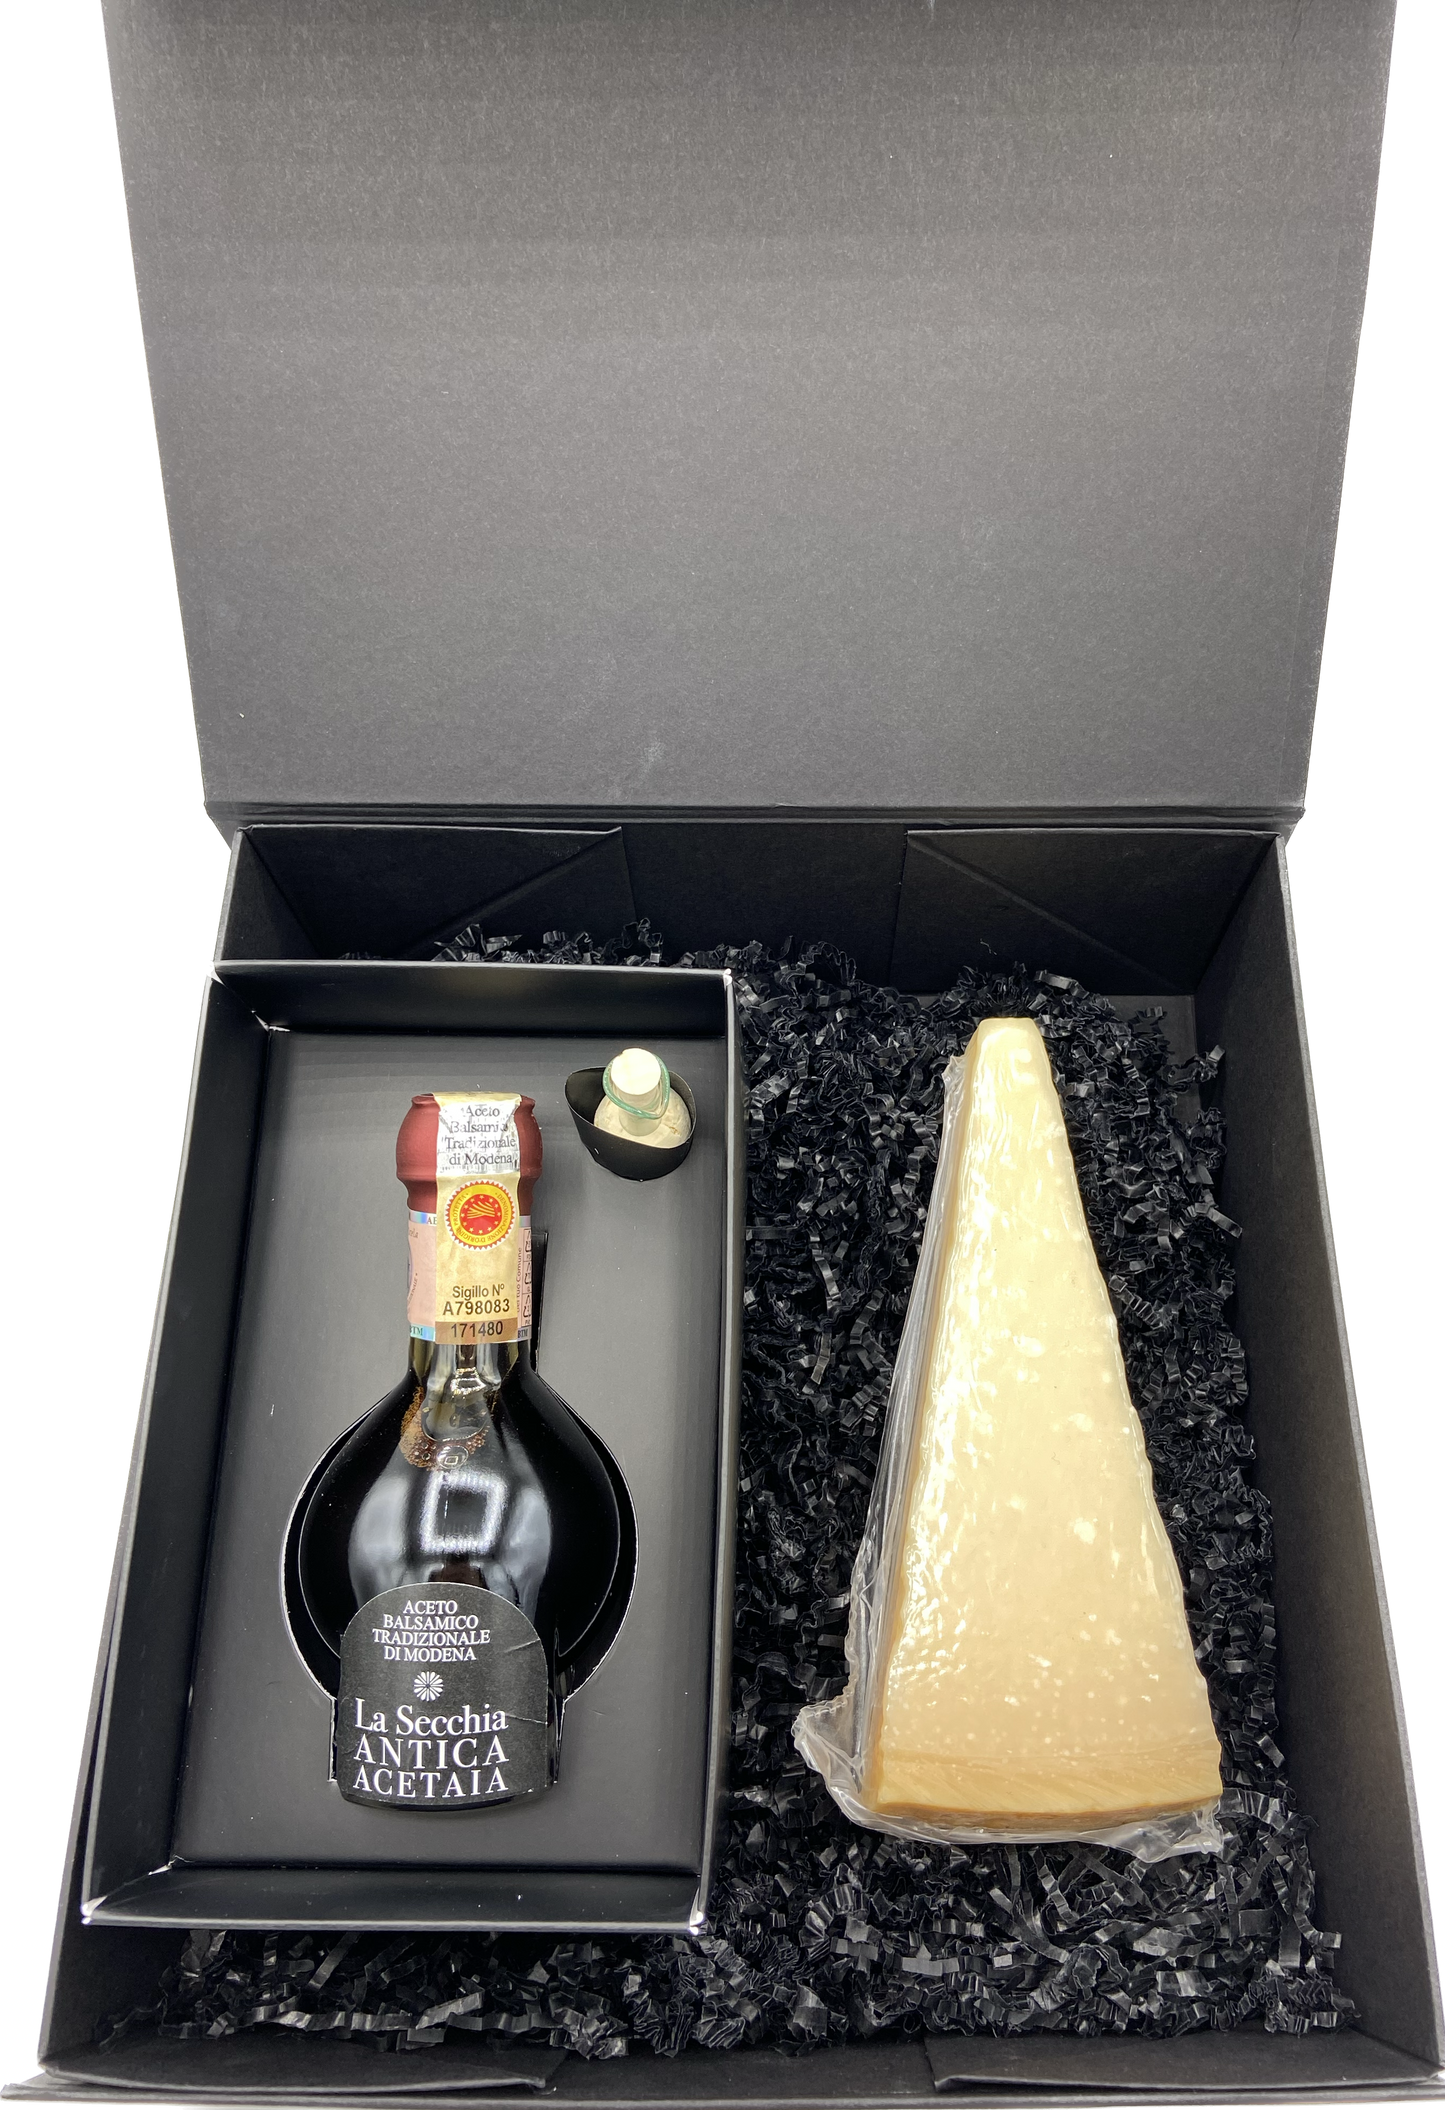 Box 3 - Traditional Balsamic Vinegar of Modena DOP 12 years and Parmesan